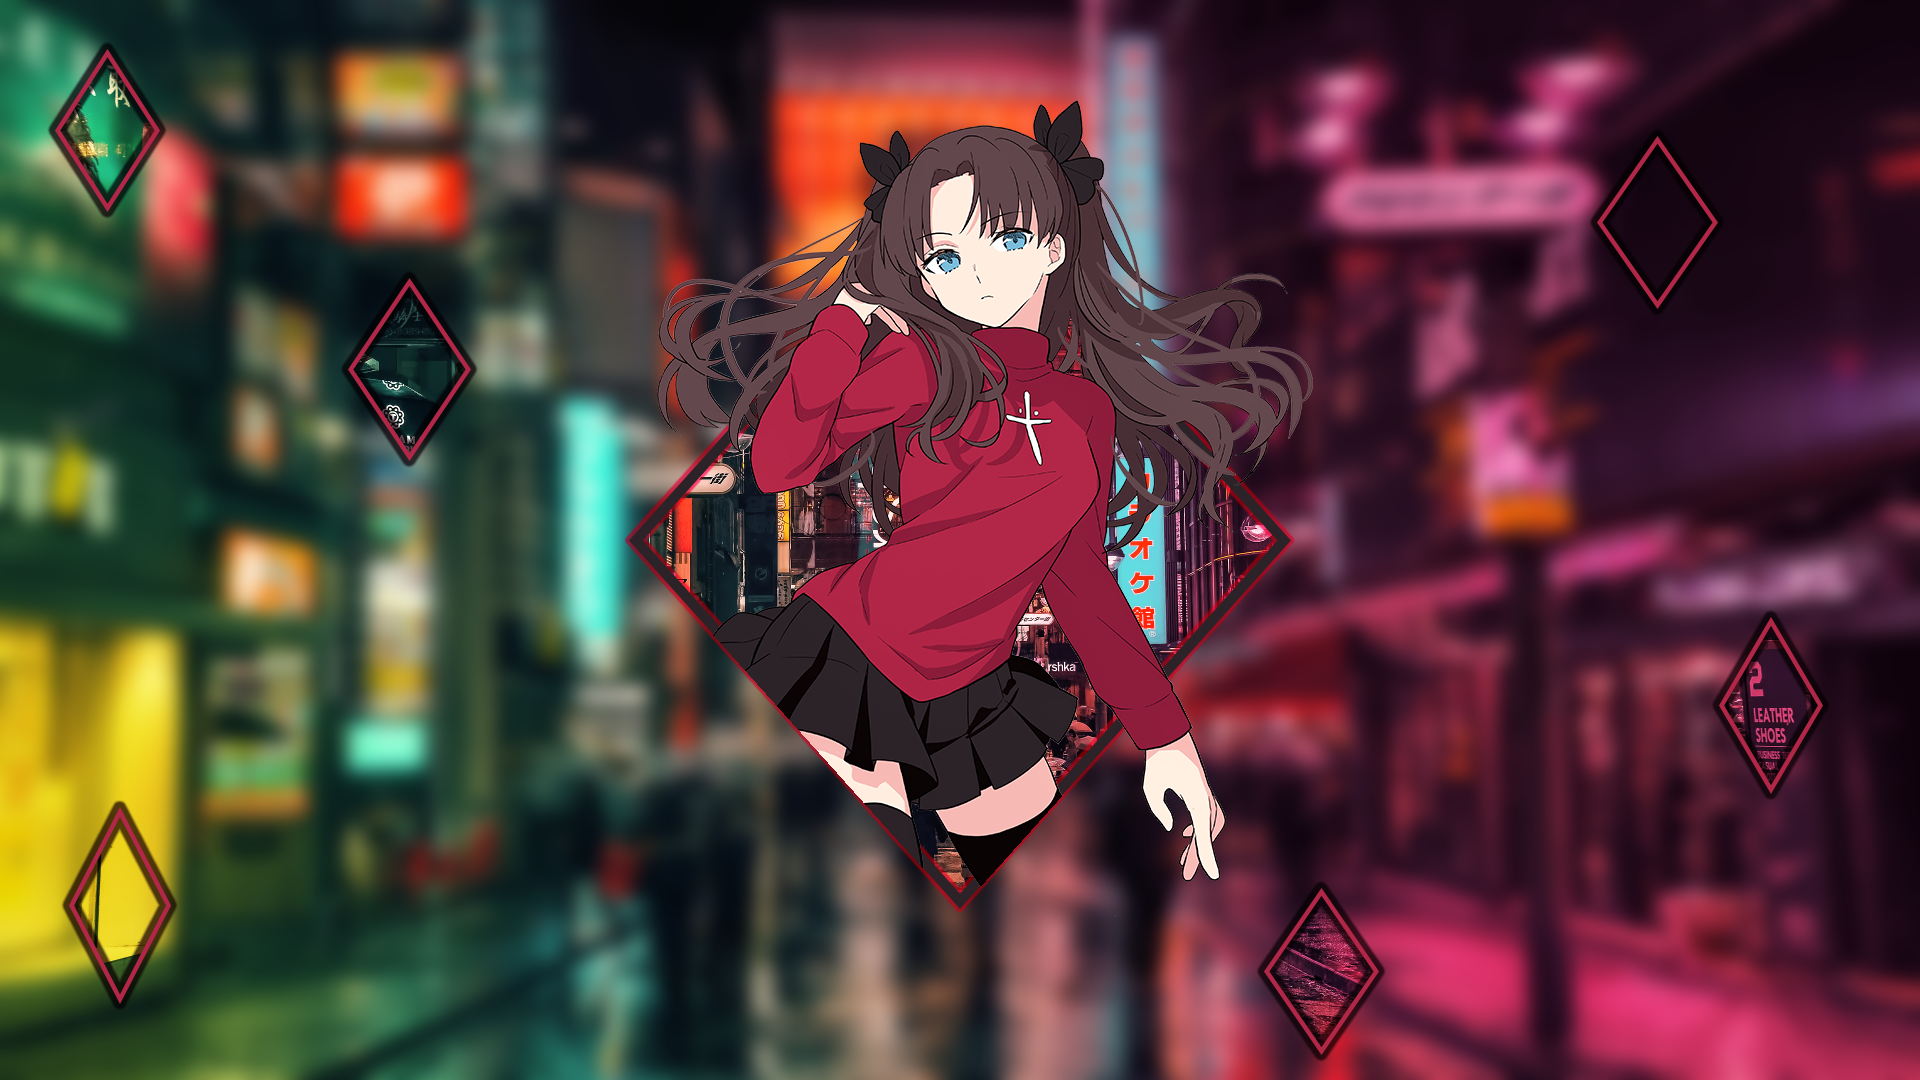 Anime 1920x1080 Tohsaka Rin Fate series city picture-in-picture